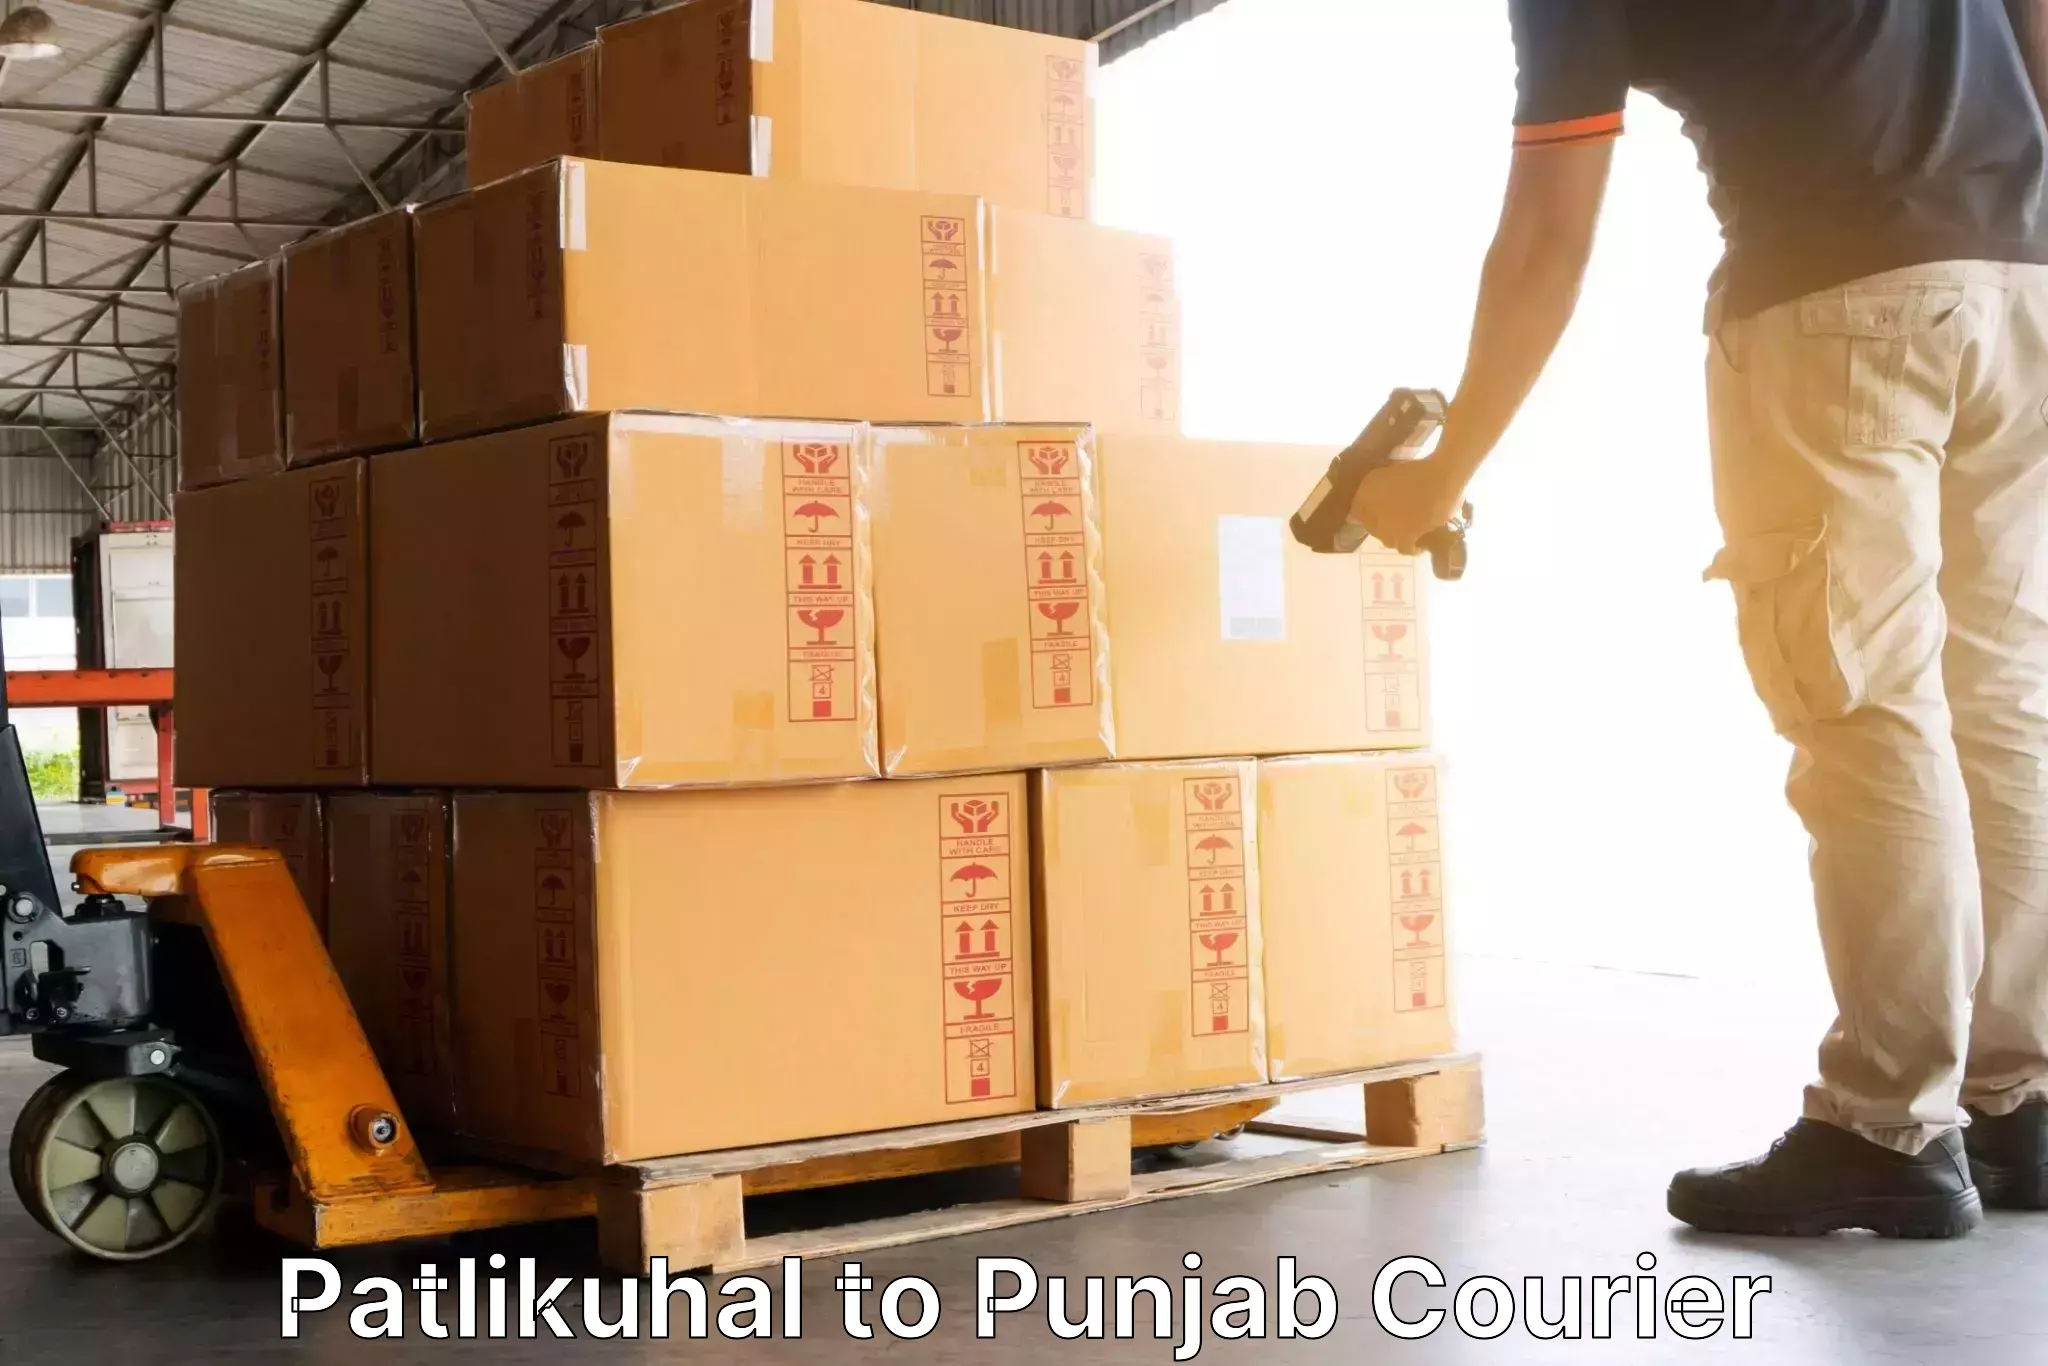 On-demand delivery Patlikuhal to Mohali